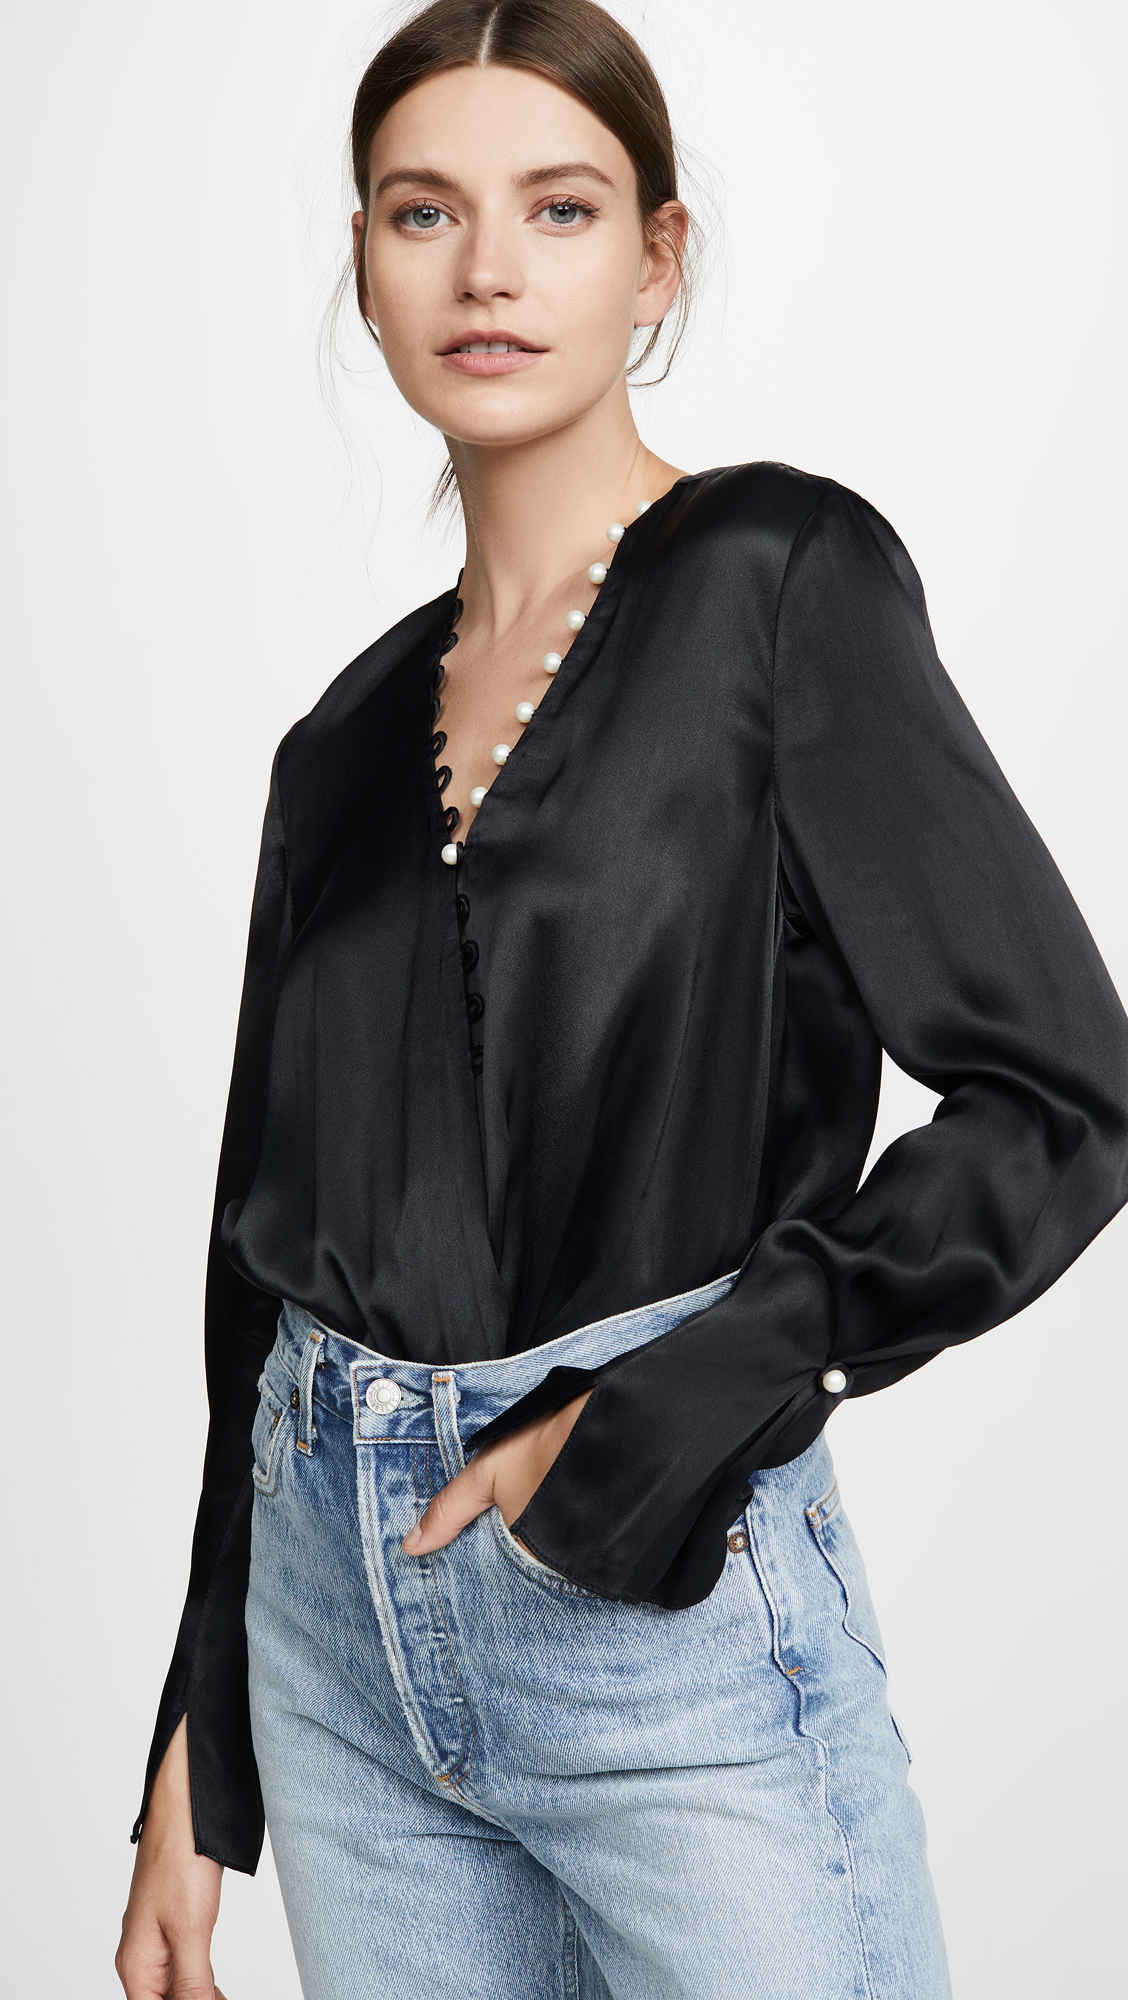 The 16 Best Going-Out Tops for Busty Women | Who What Wear